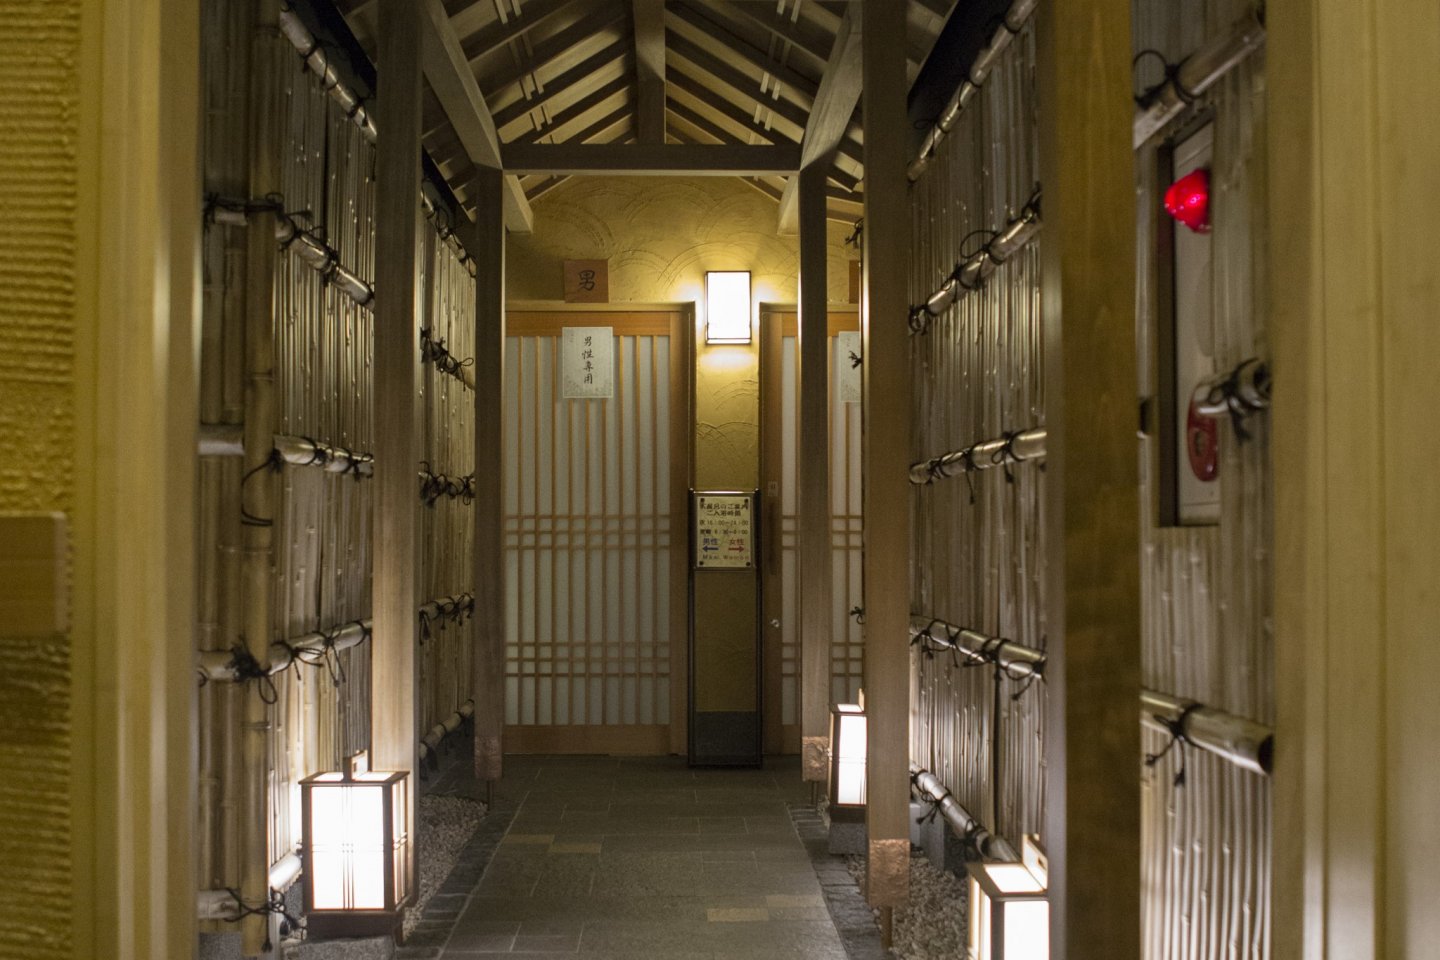 The Onsen style corridor leading to the baths is beautiful.